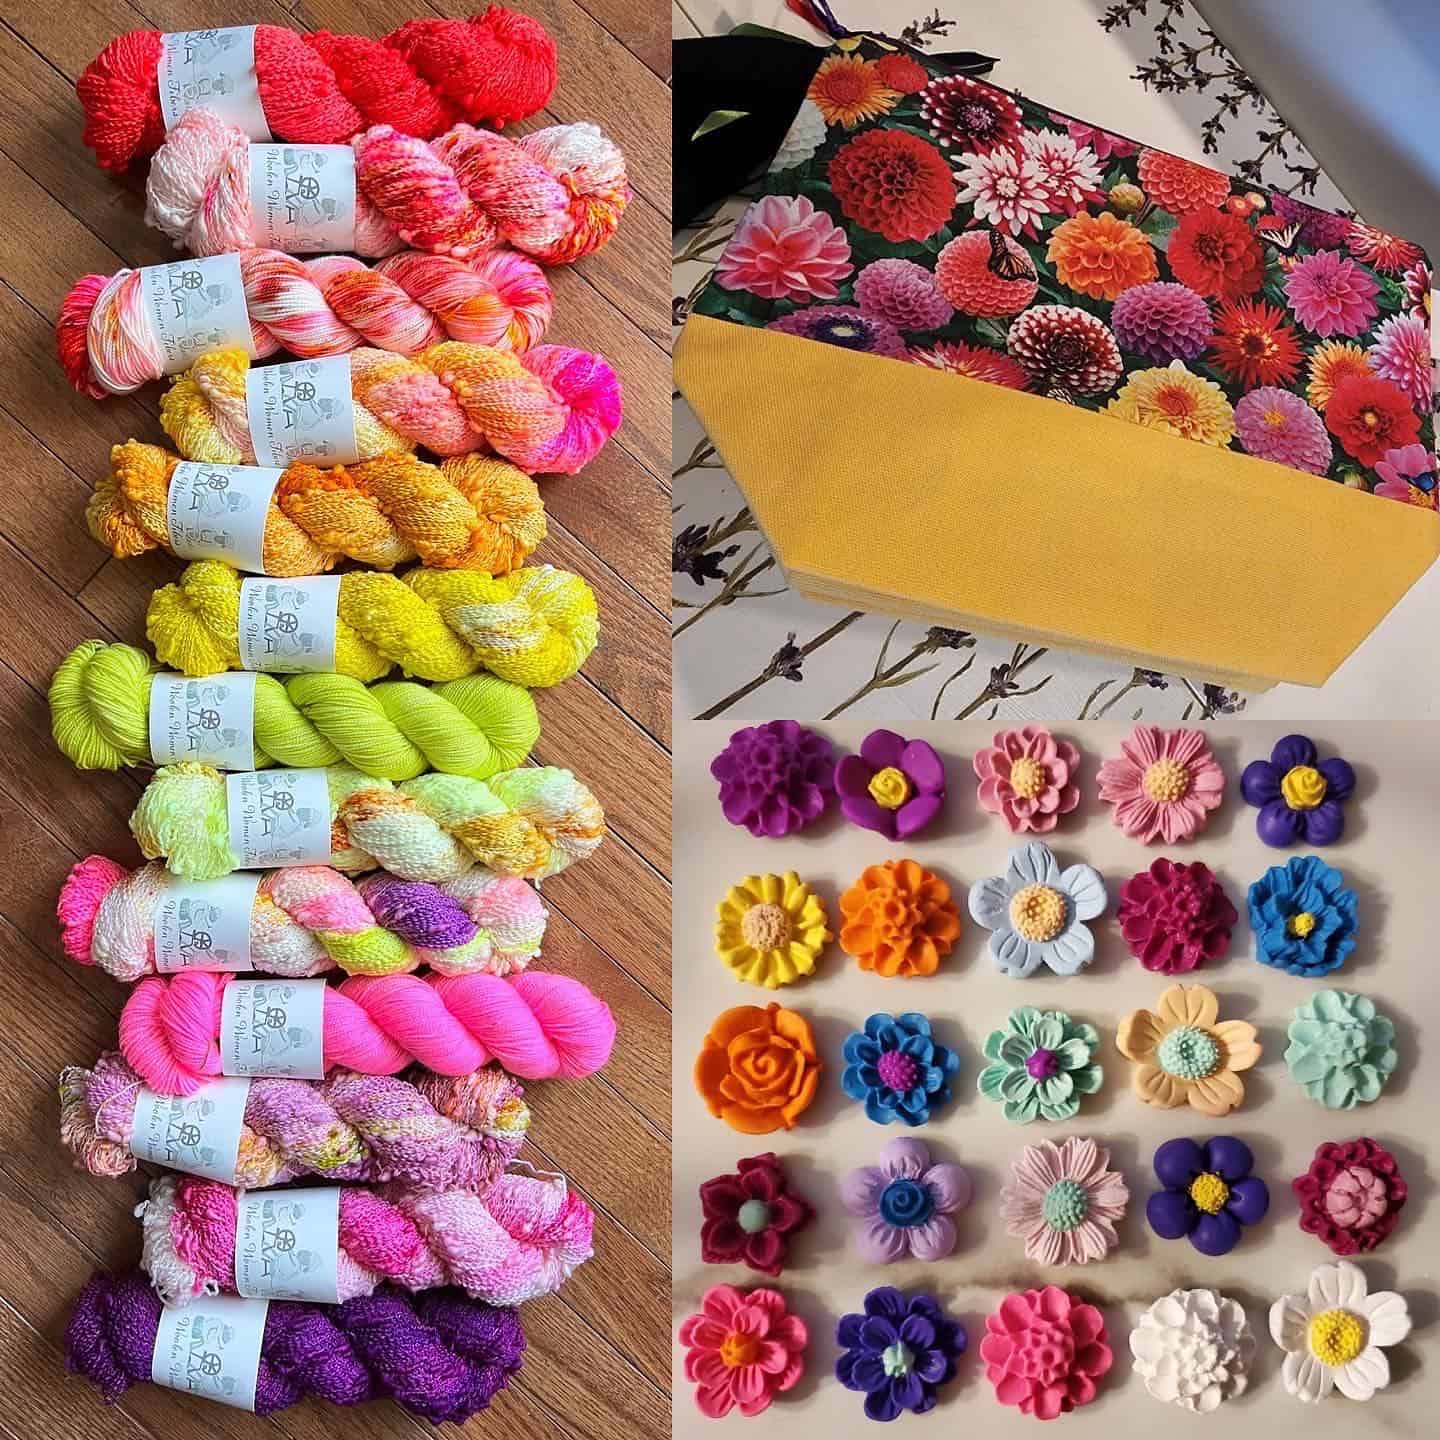 Skeins of brightly colored yellow, purple, pink and orange yarns. A flower patterned project bag and varying brightly colored flower charms.